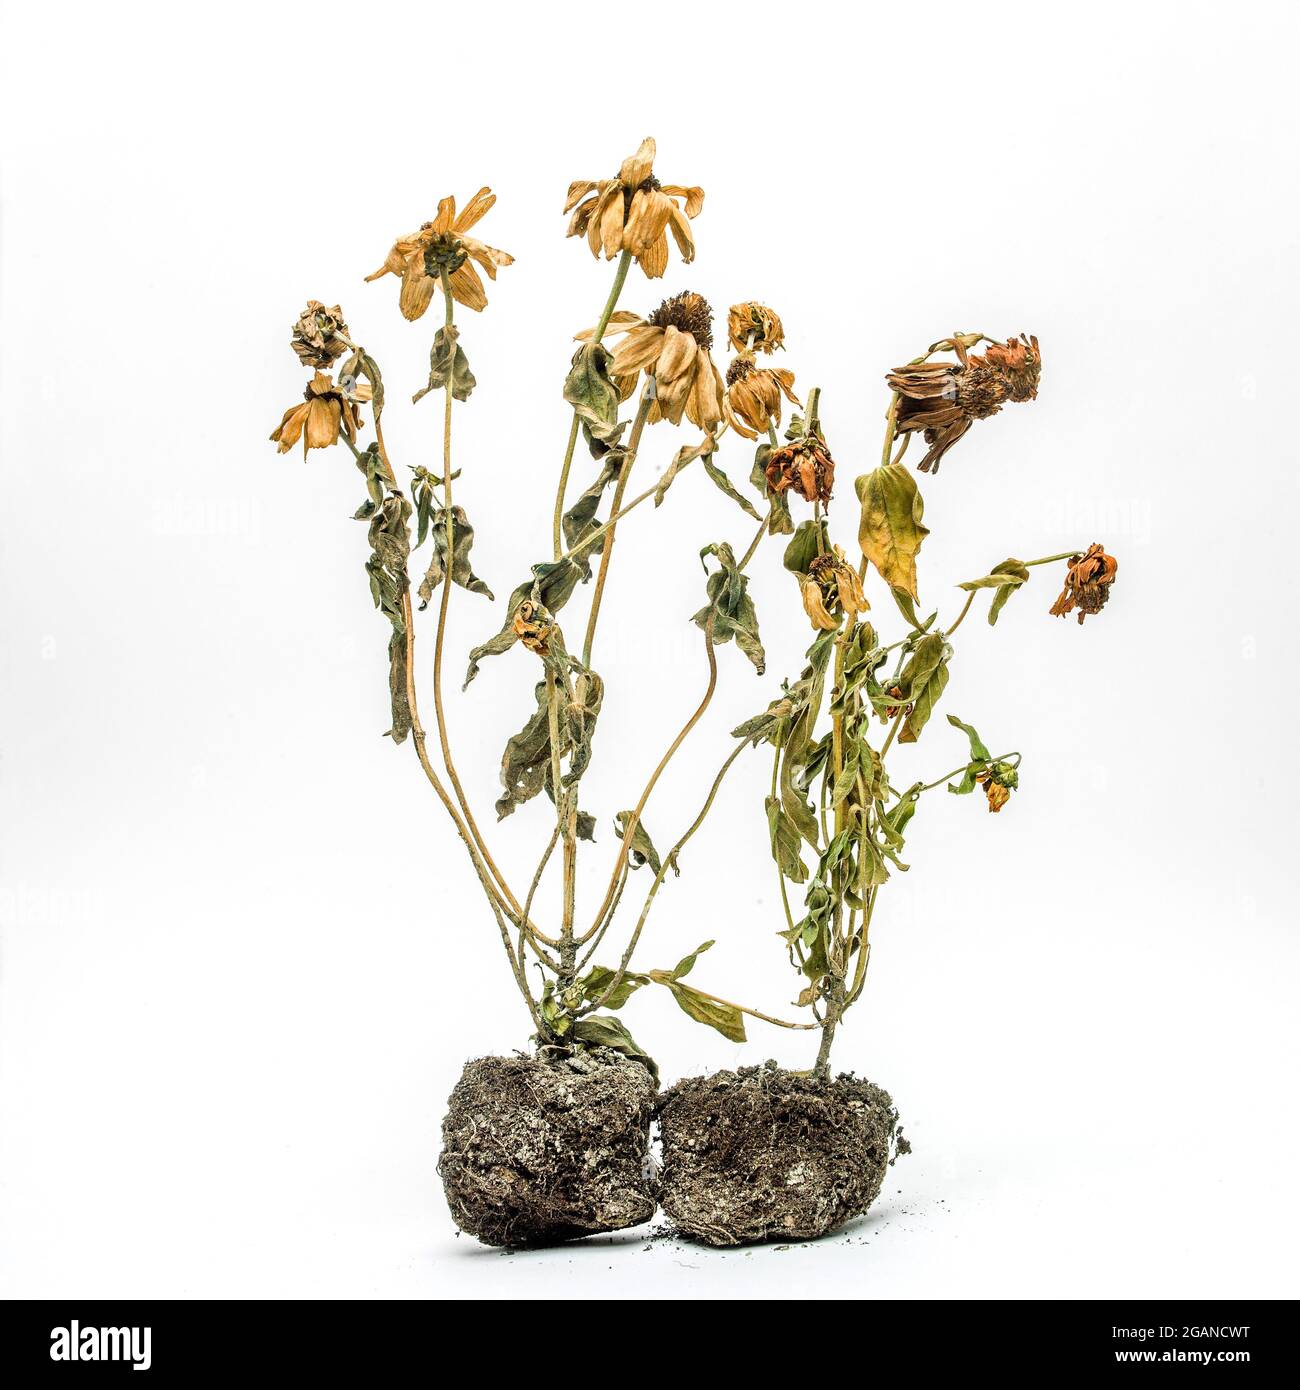 Withered flowers on white background, studio shot Stock Photo